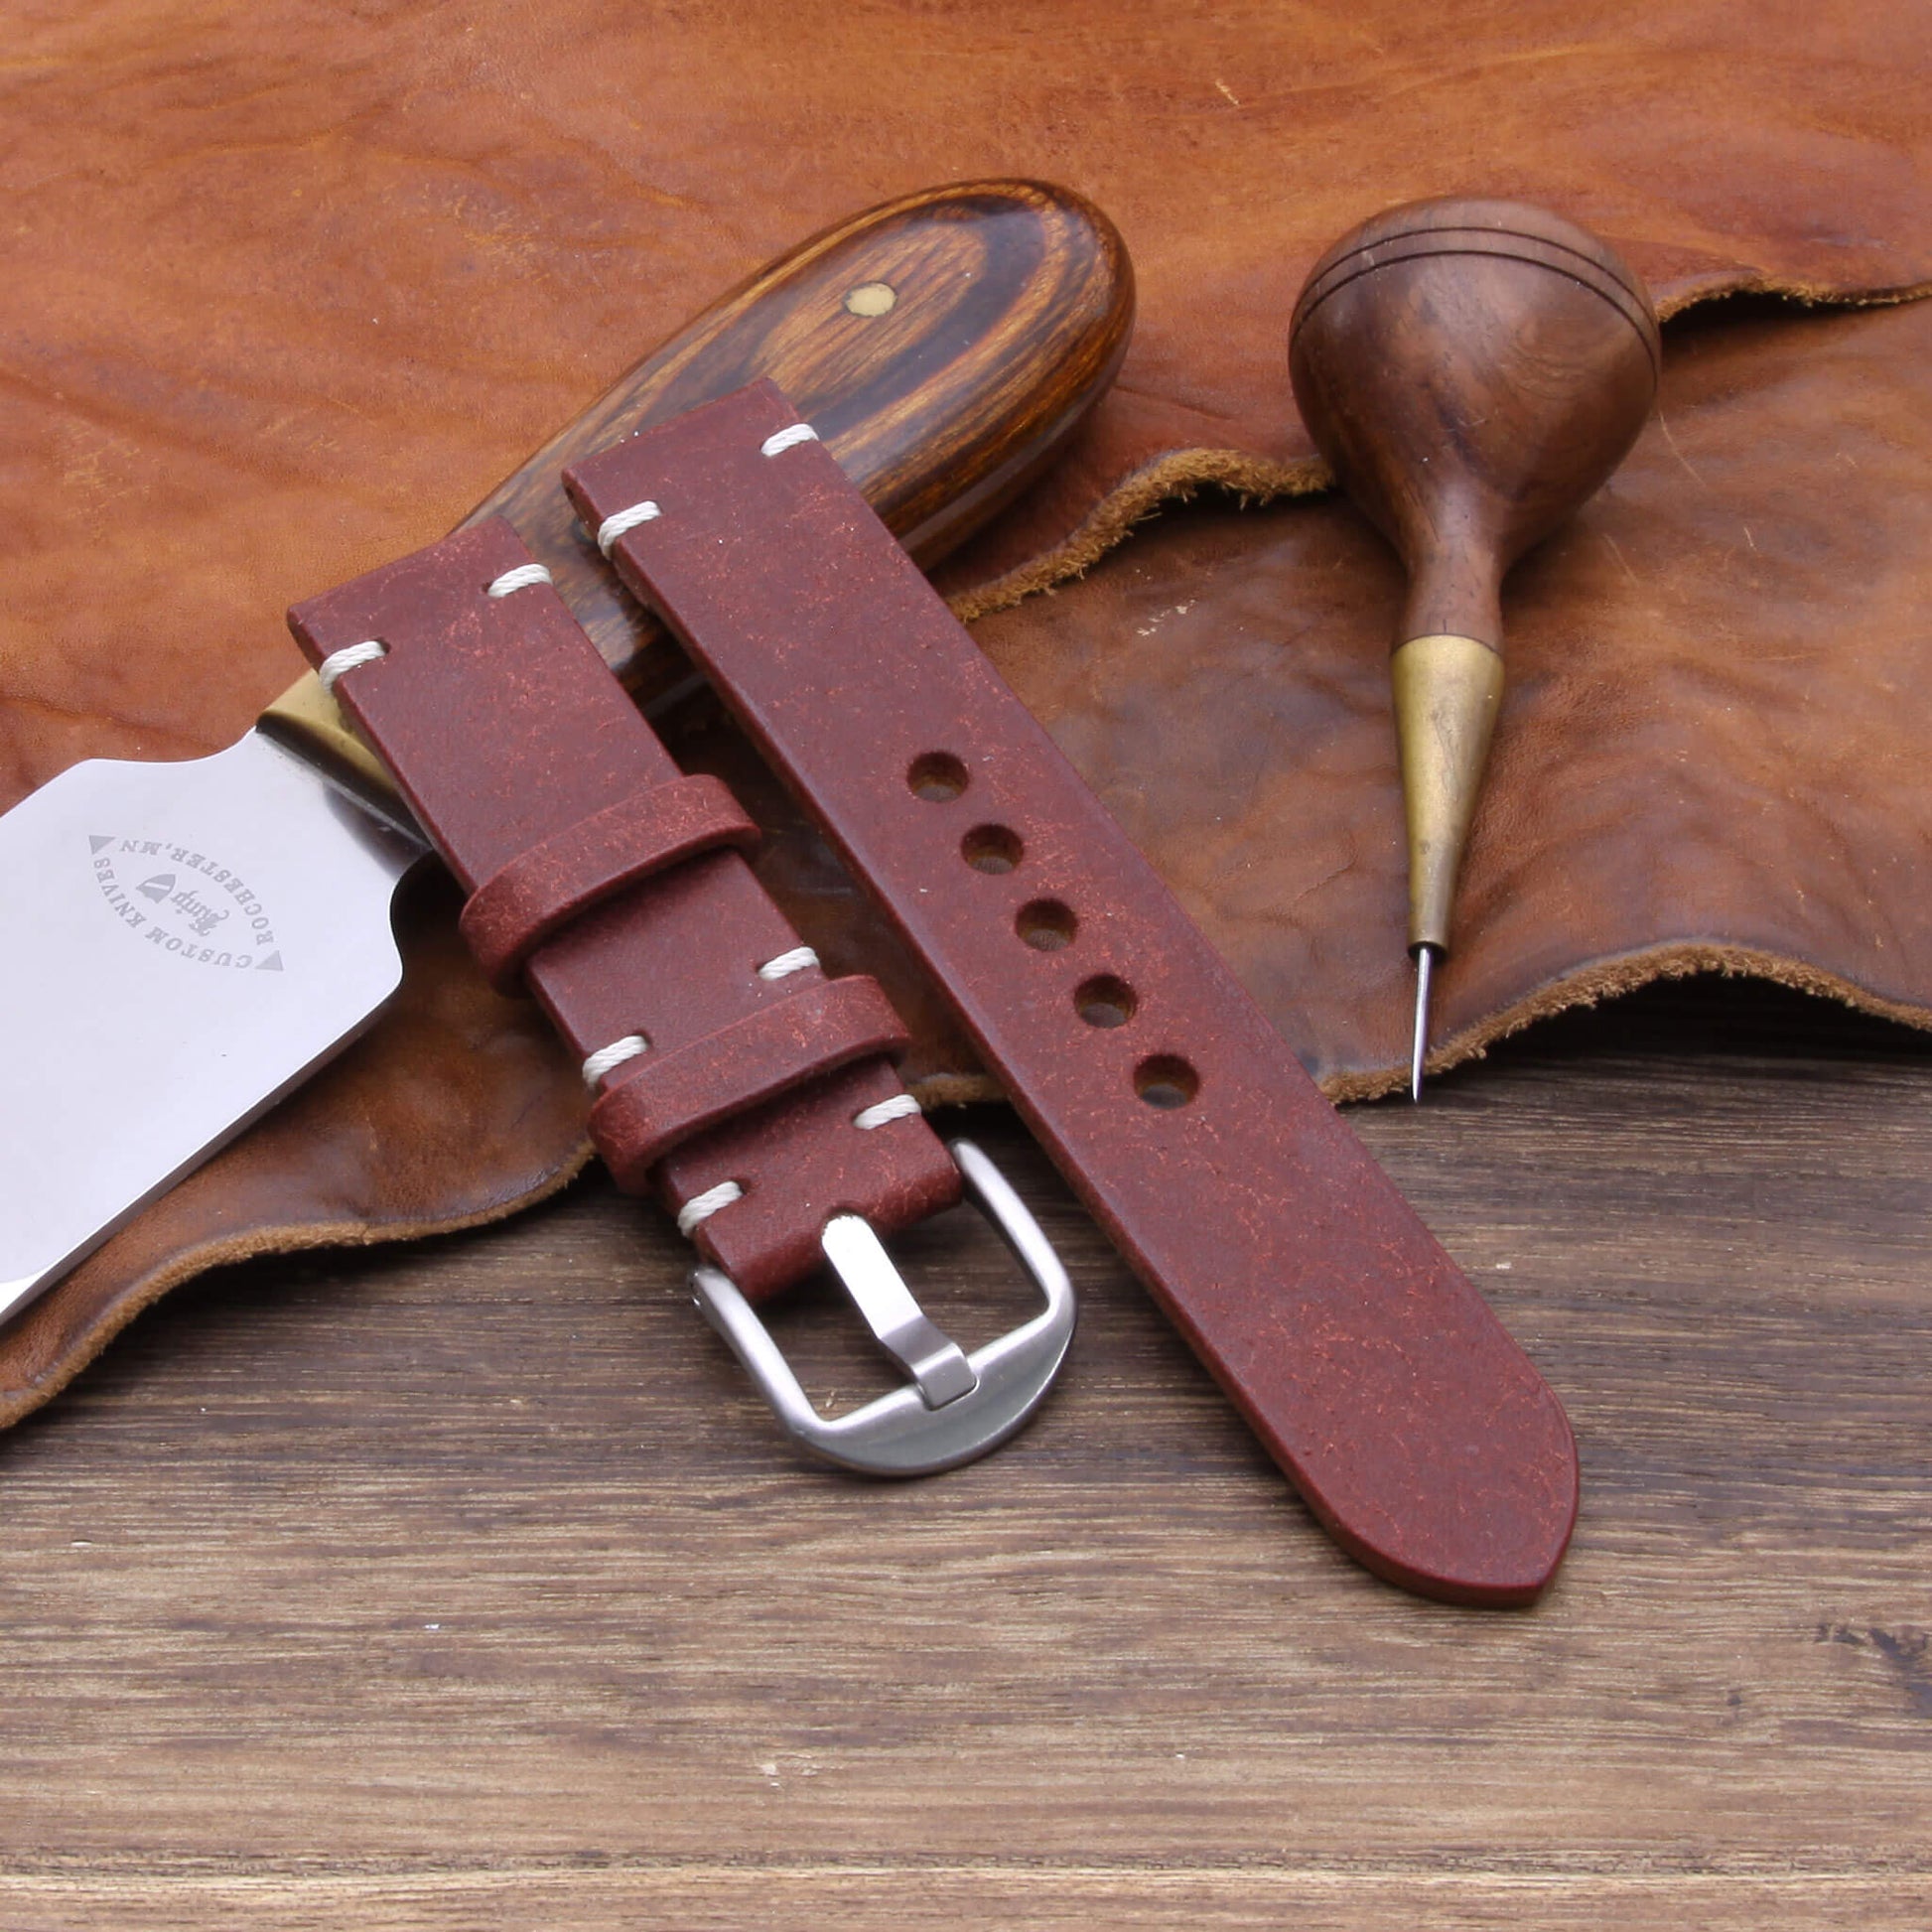 3rd View of 2-Piece Minimalist Leather Watch Strap, made with Pueblo Cocinella Italian veg-tanned leather by Cozy Handmade